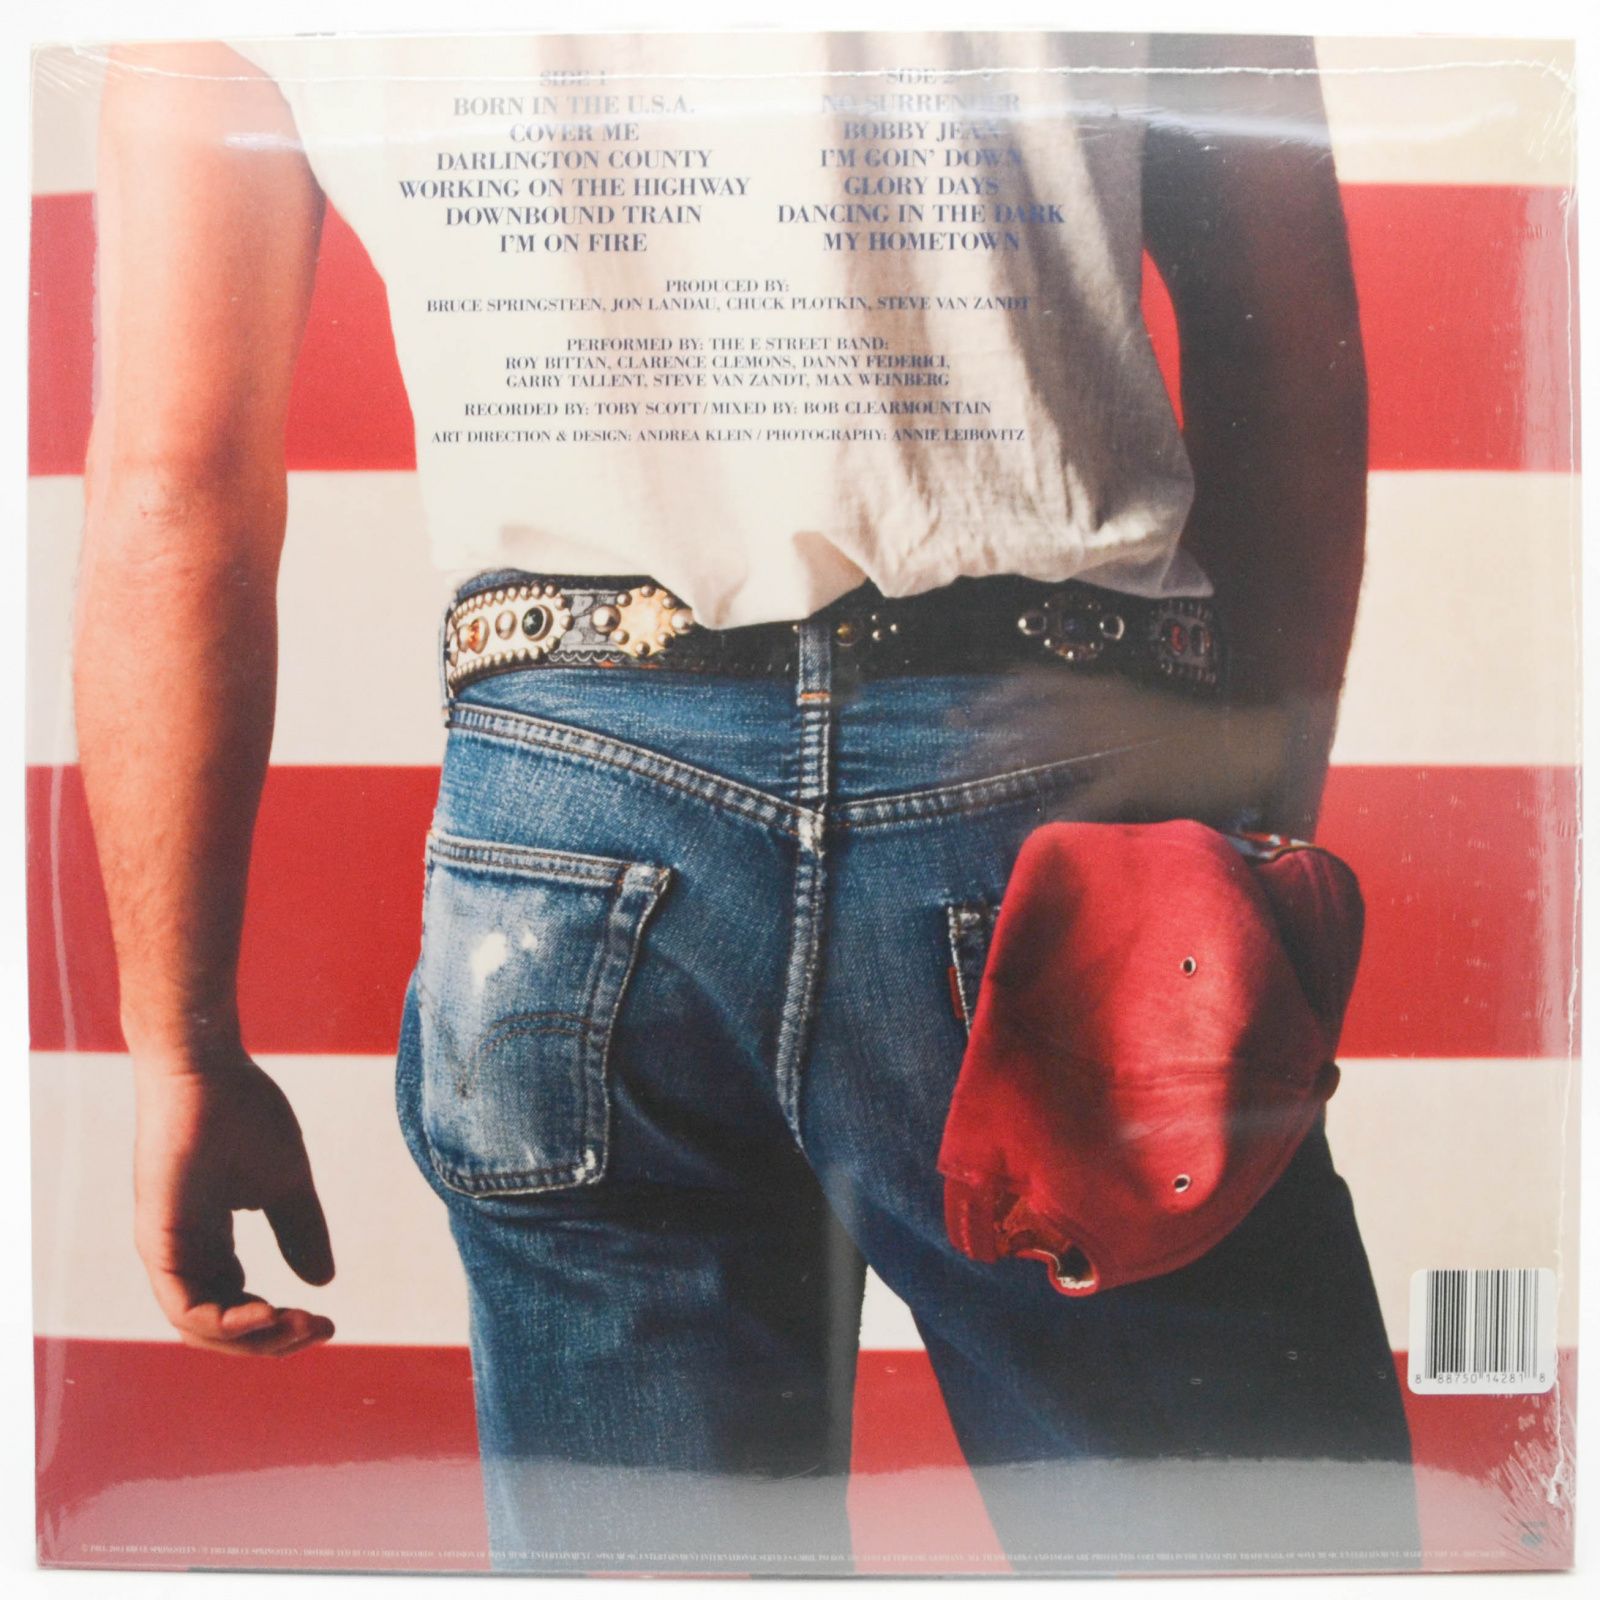 Bruce Springsteen — Born In The U.S.A., 1984